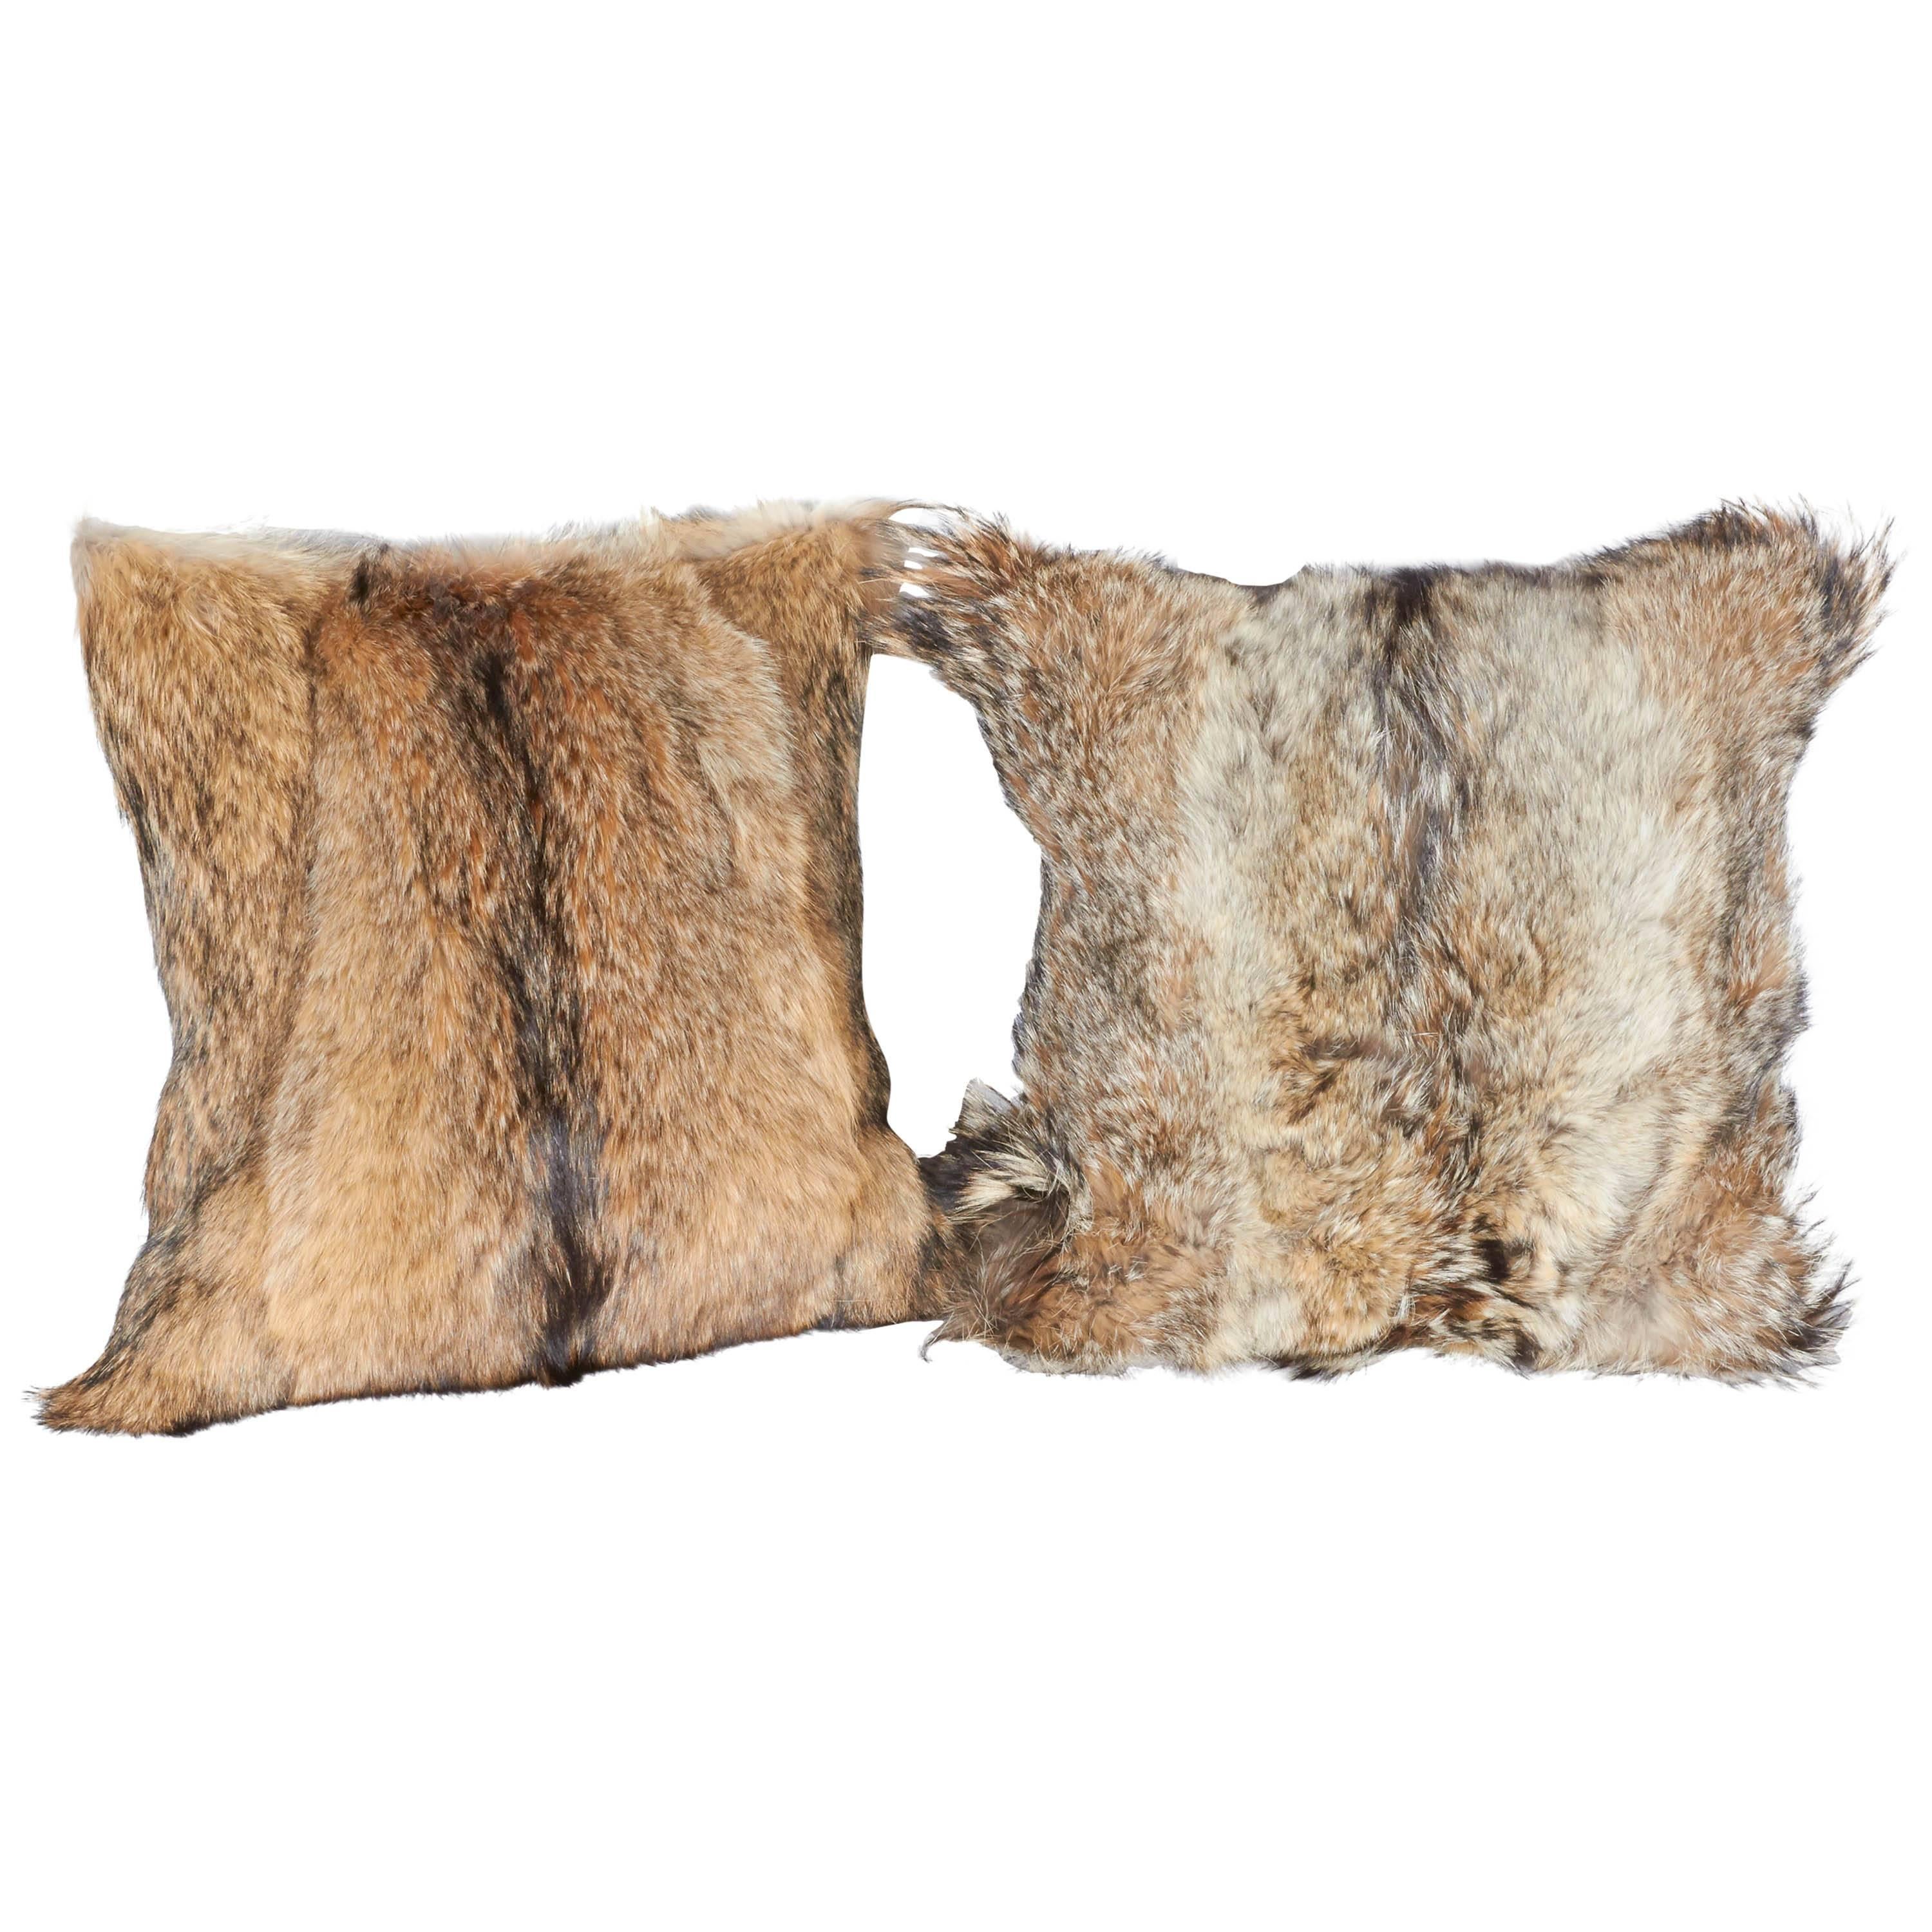 Custom-made ultra luxe decorative pillow handcrafted from coyote fur in hues of, tan, camel, ivory and brown, with the occasional black streaks. Each pillow is unique in coloration and texture, and features hand-stitched backing in Fine khaki